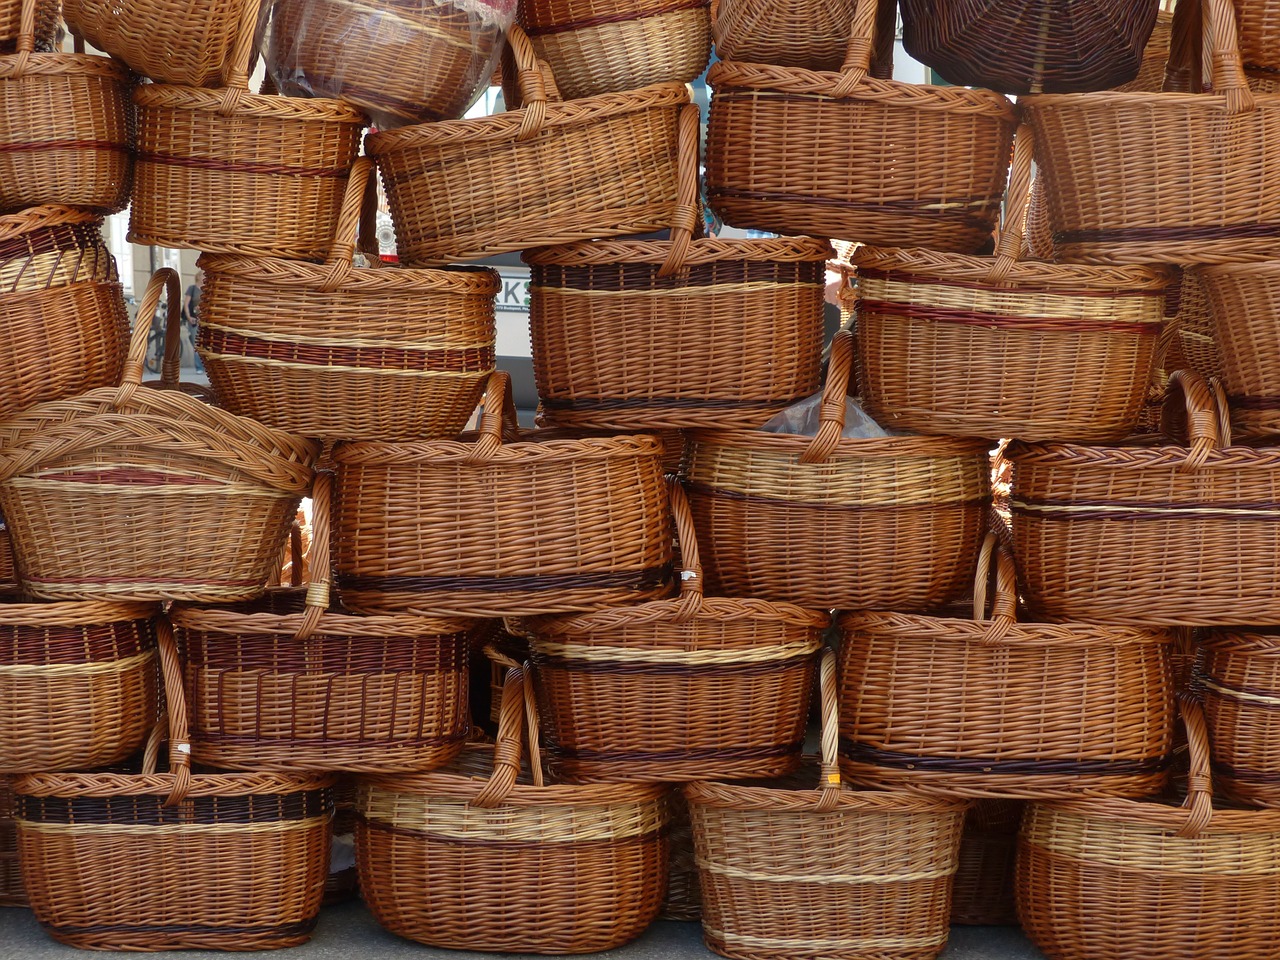 baskets carry cot shopping basket free photo